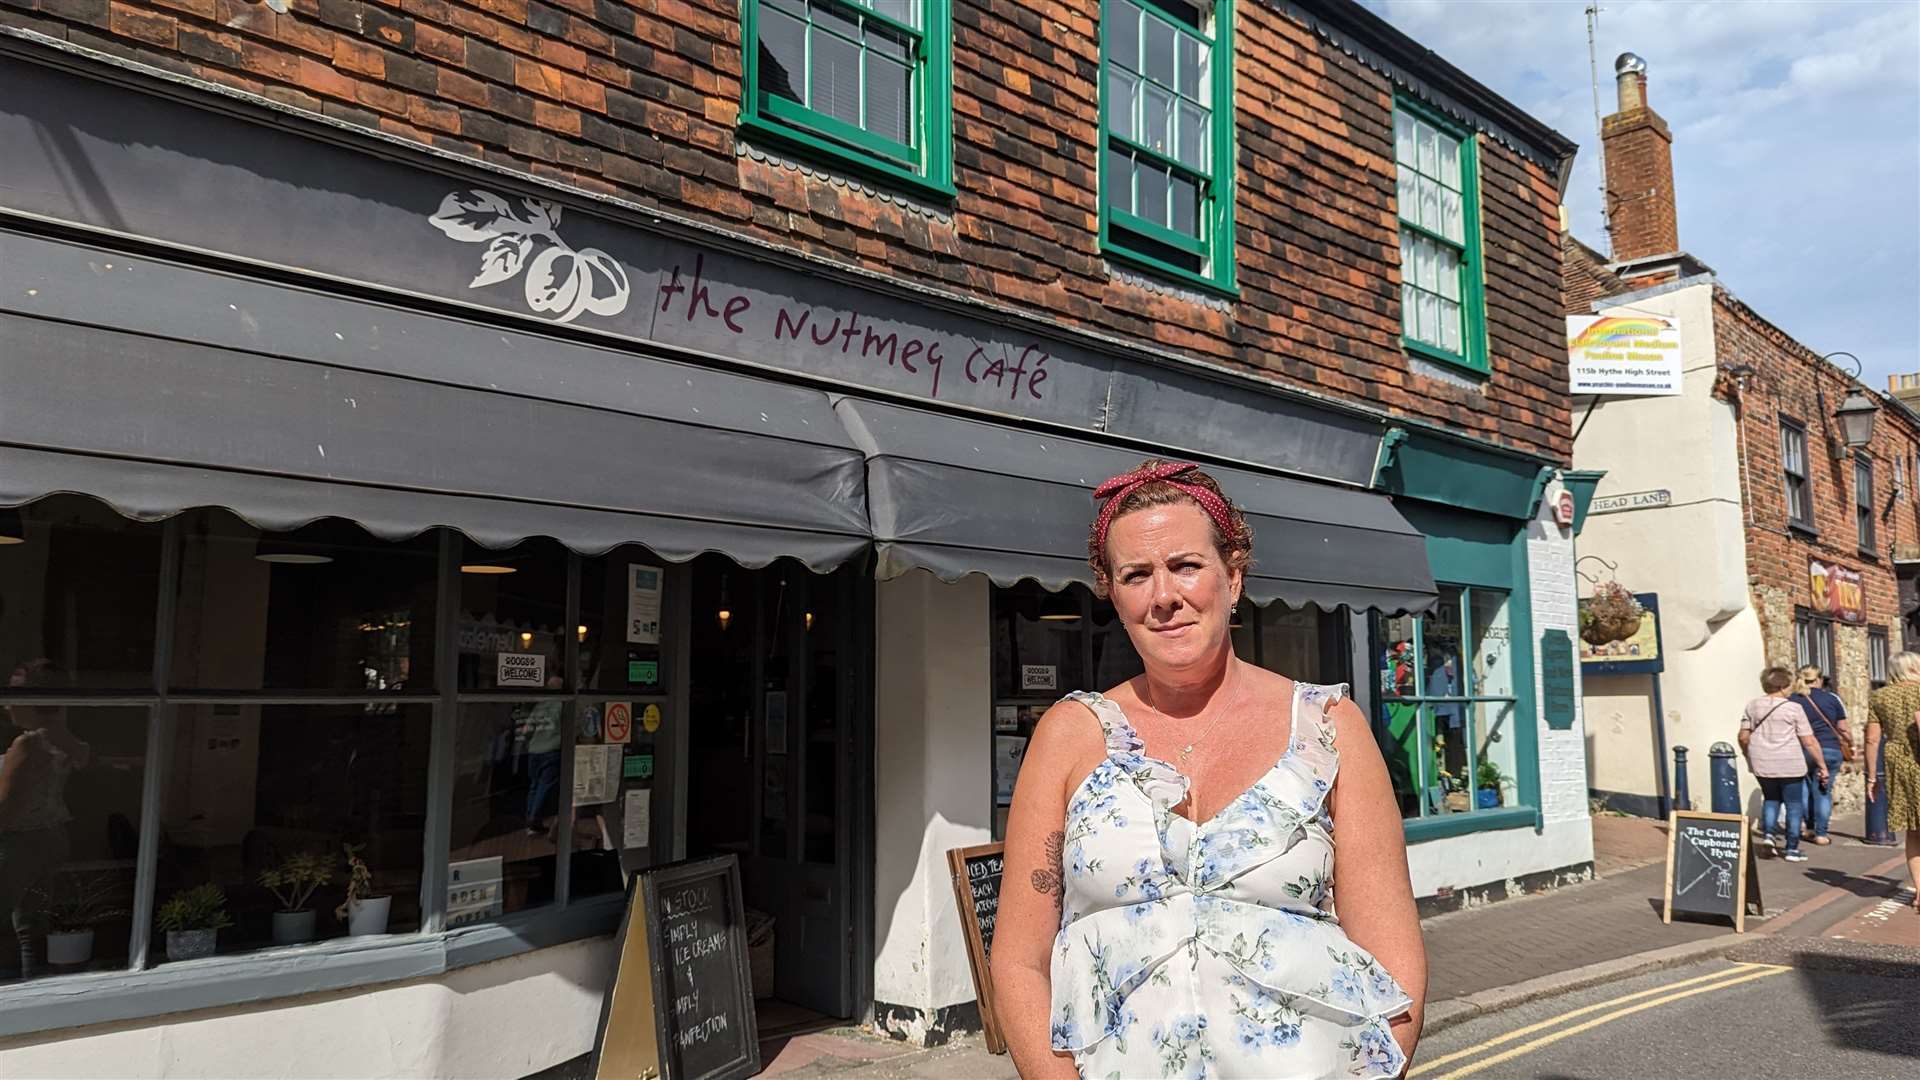 Nicola Robinson, owner of the Nutmeg cafe on the High Street in Hythe, says her monthly energy bill is going up from £650 to more than £3,000